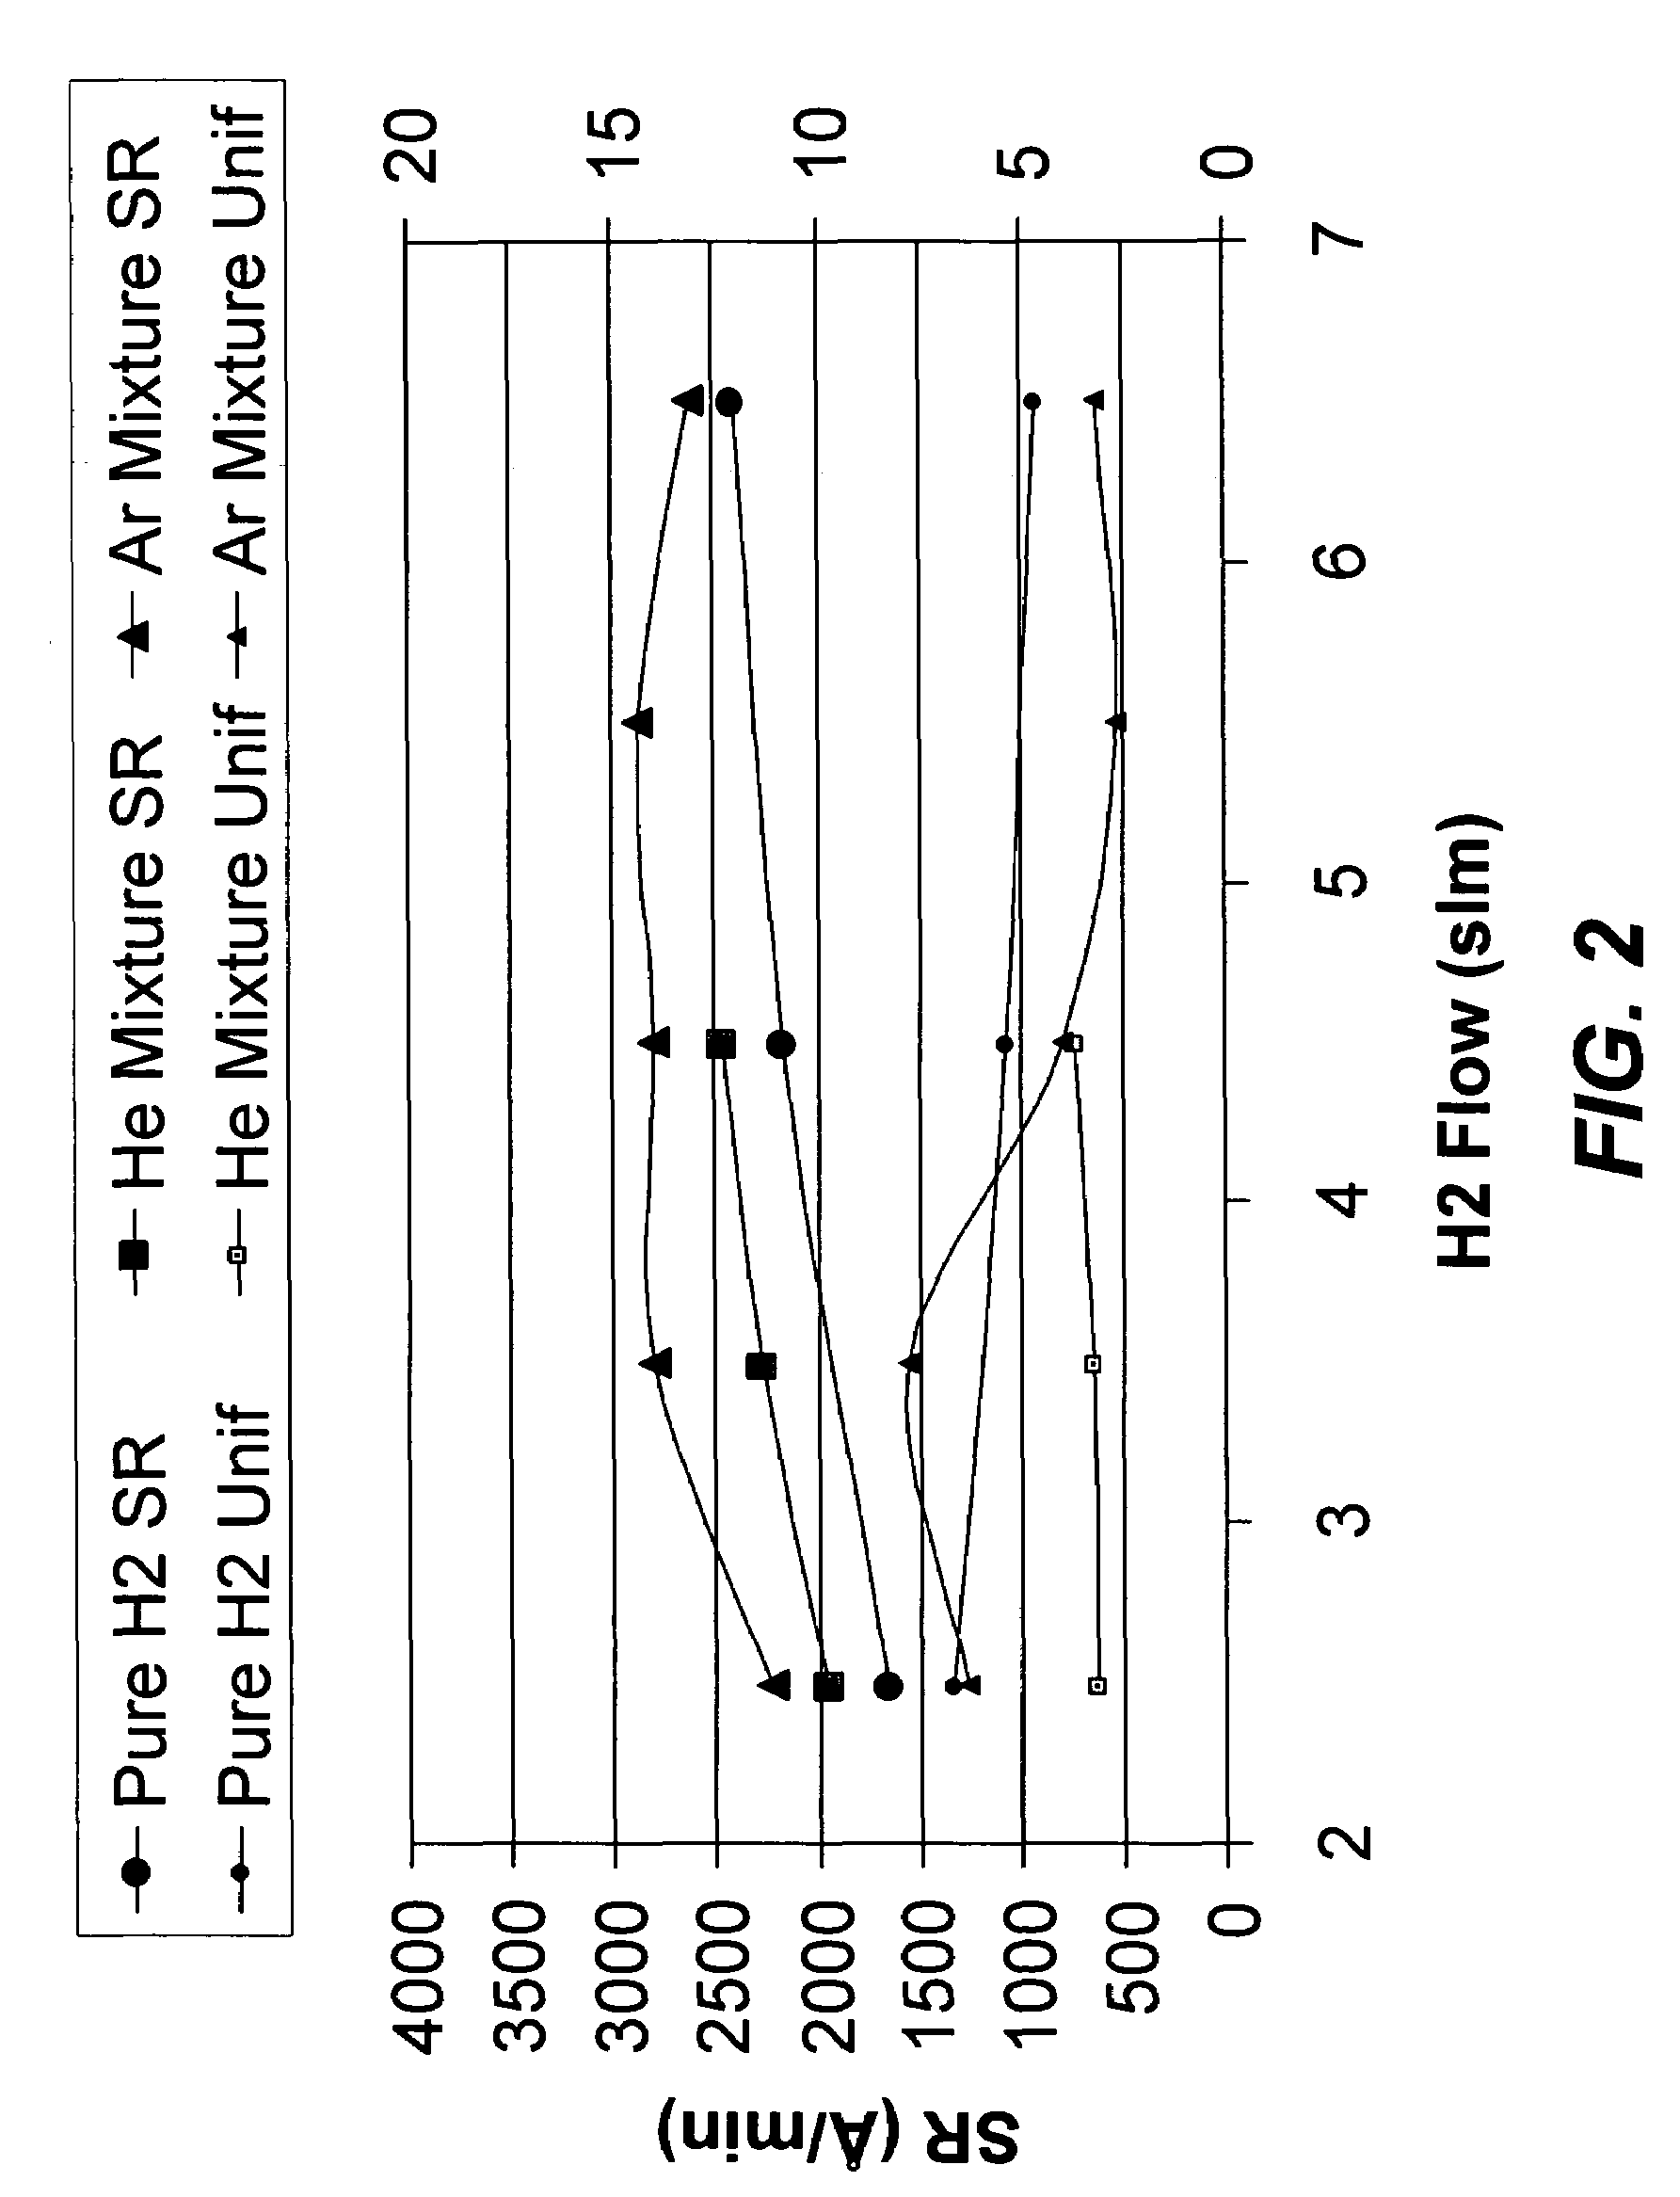 Enhanced stripping of low-k films using downstream gas mixing